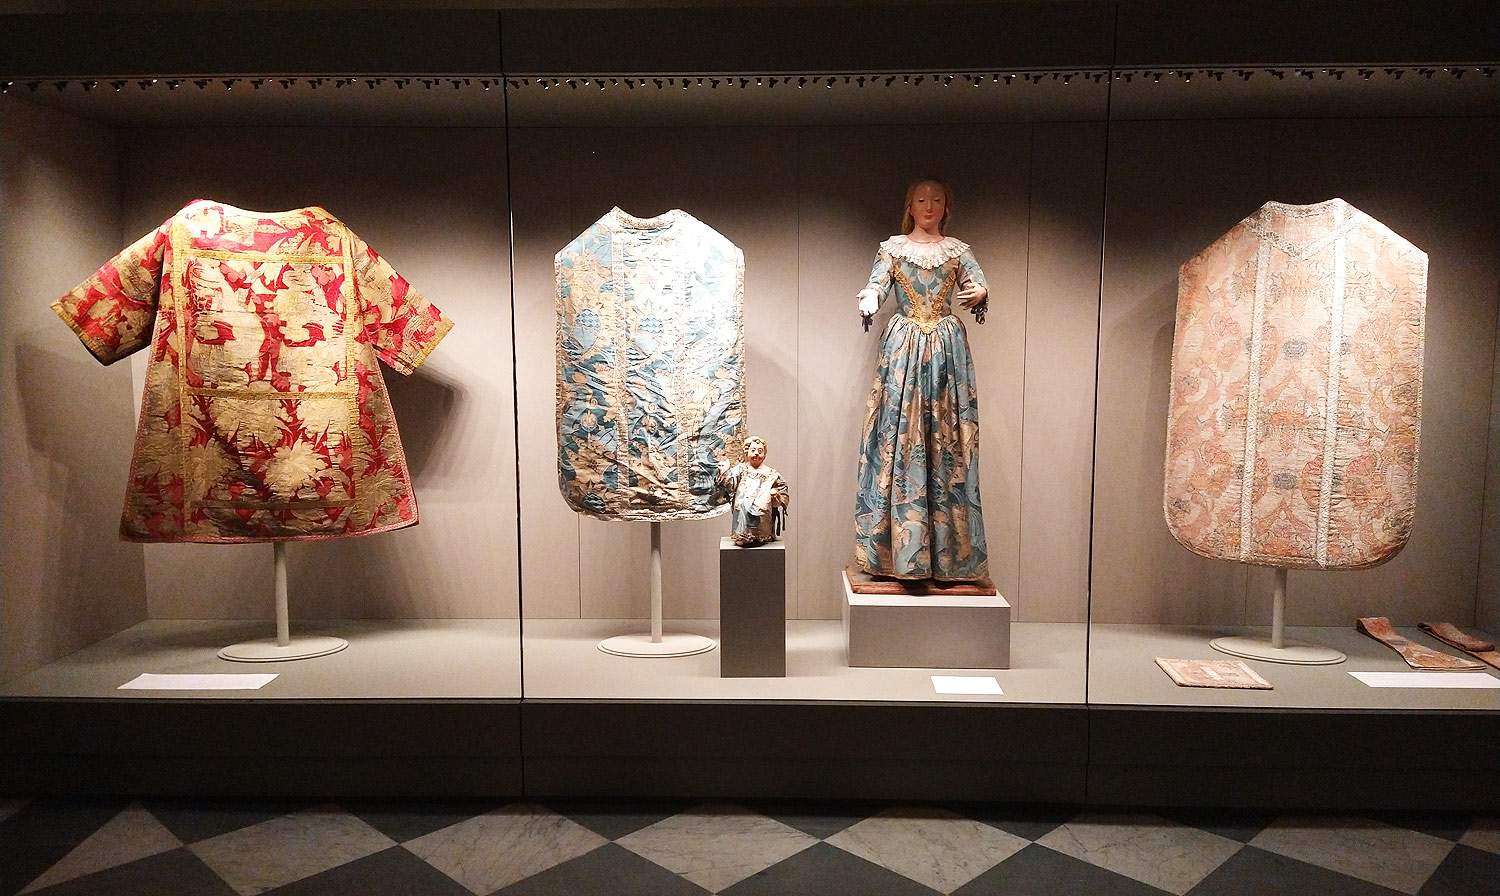 Massa, an exhibition on ancient textiles and liturgical vestments at the Diocesan Museum